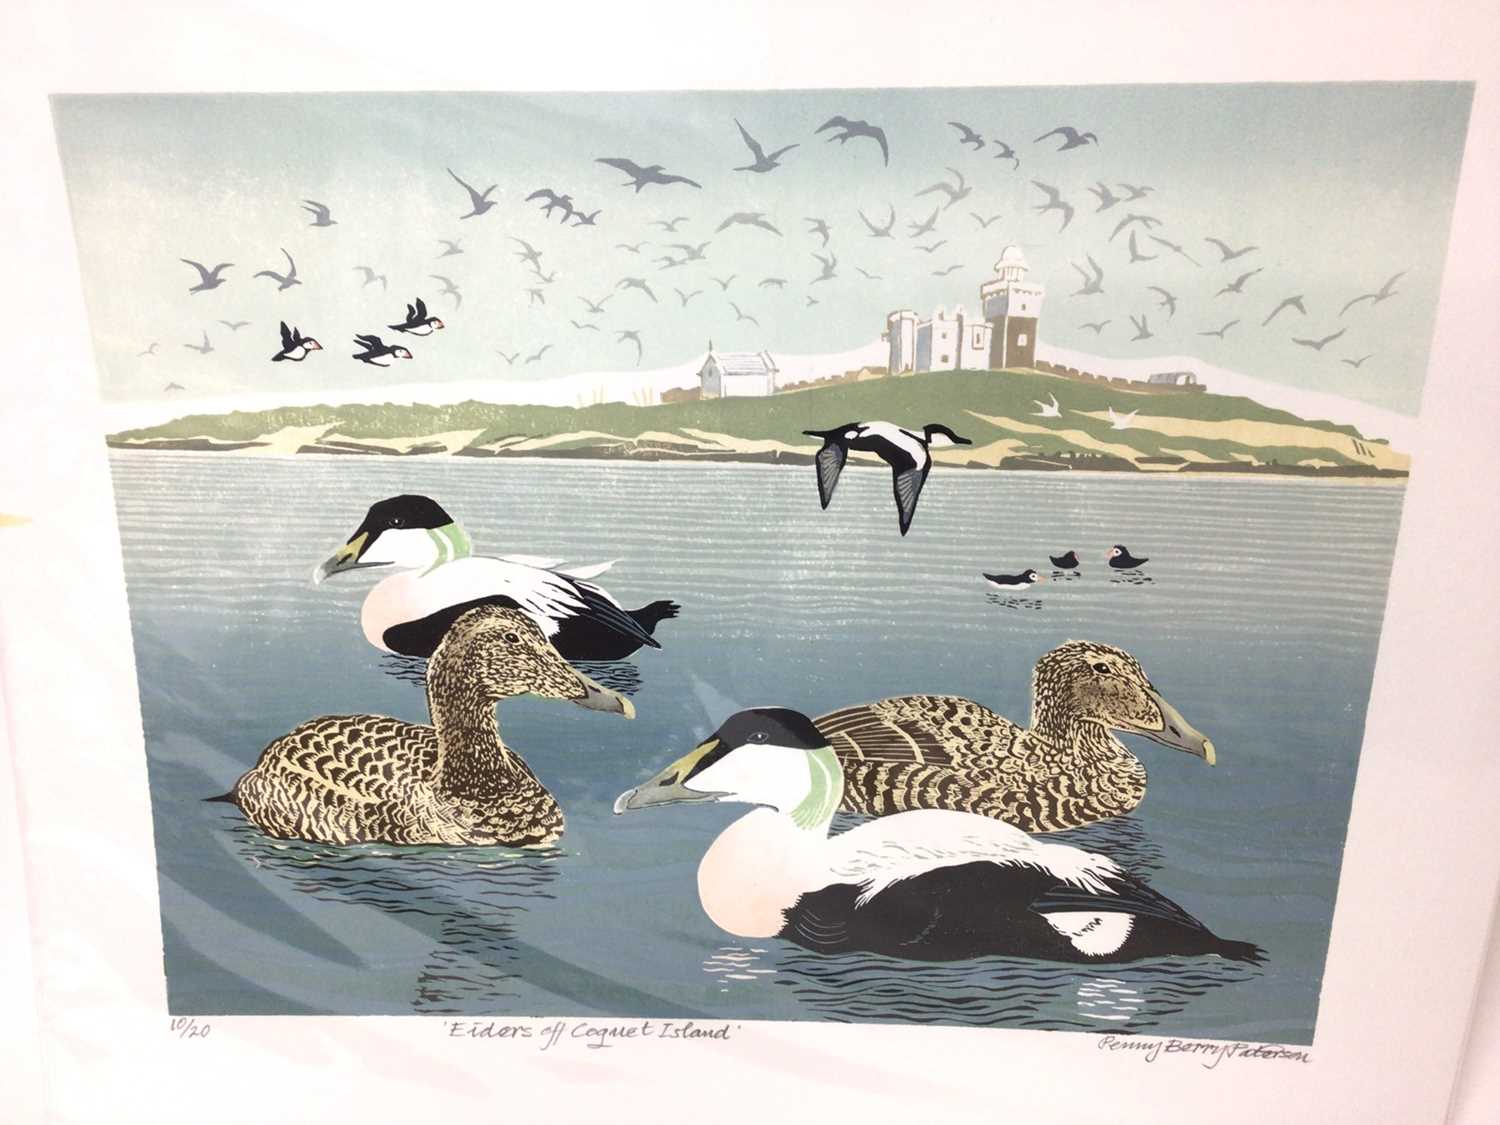 Lot 163 - Penny Berry Paterson (1941-2021) colour linocut, Eiders off Coguet Island, signed, titled and numbered 4/20, image 32 x 42cm, unframed